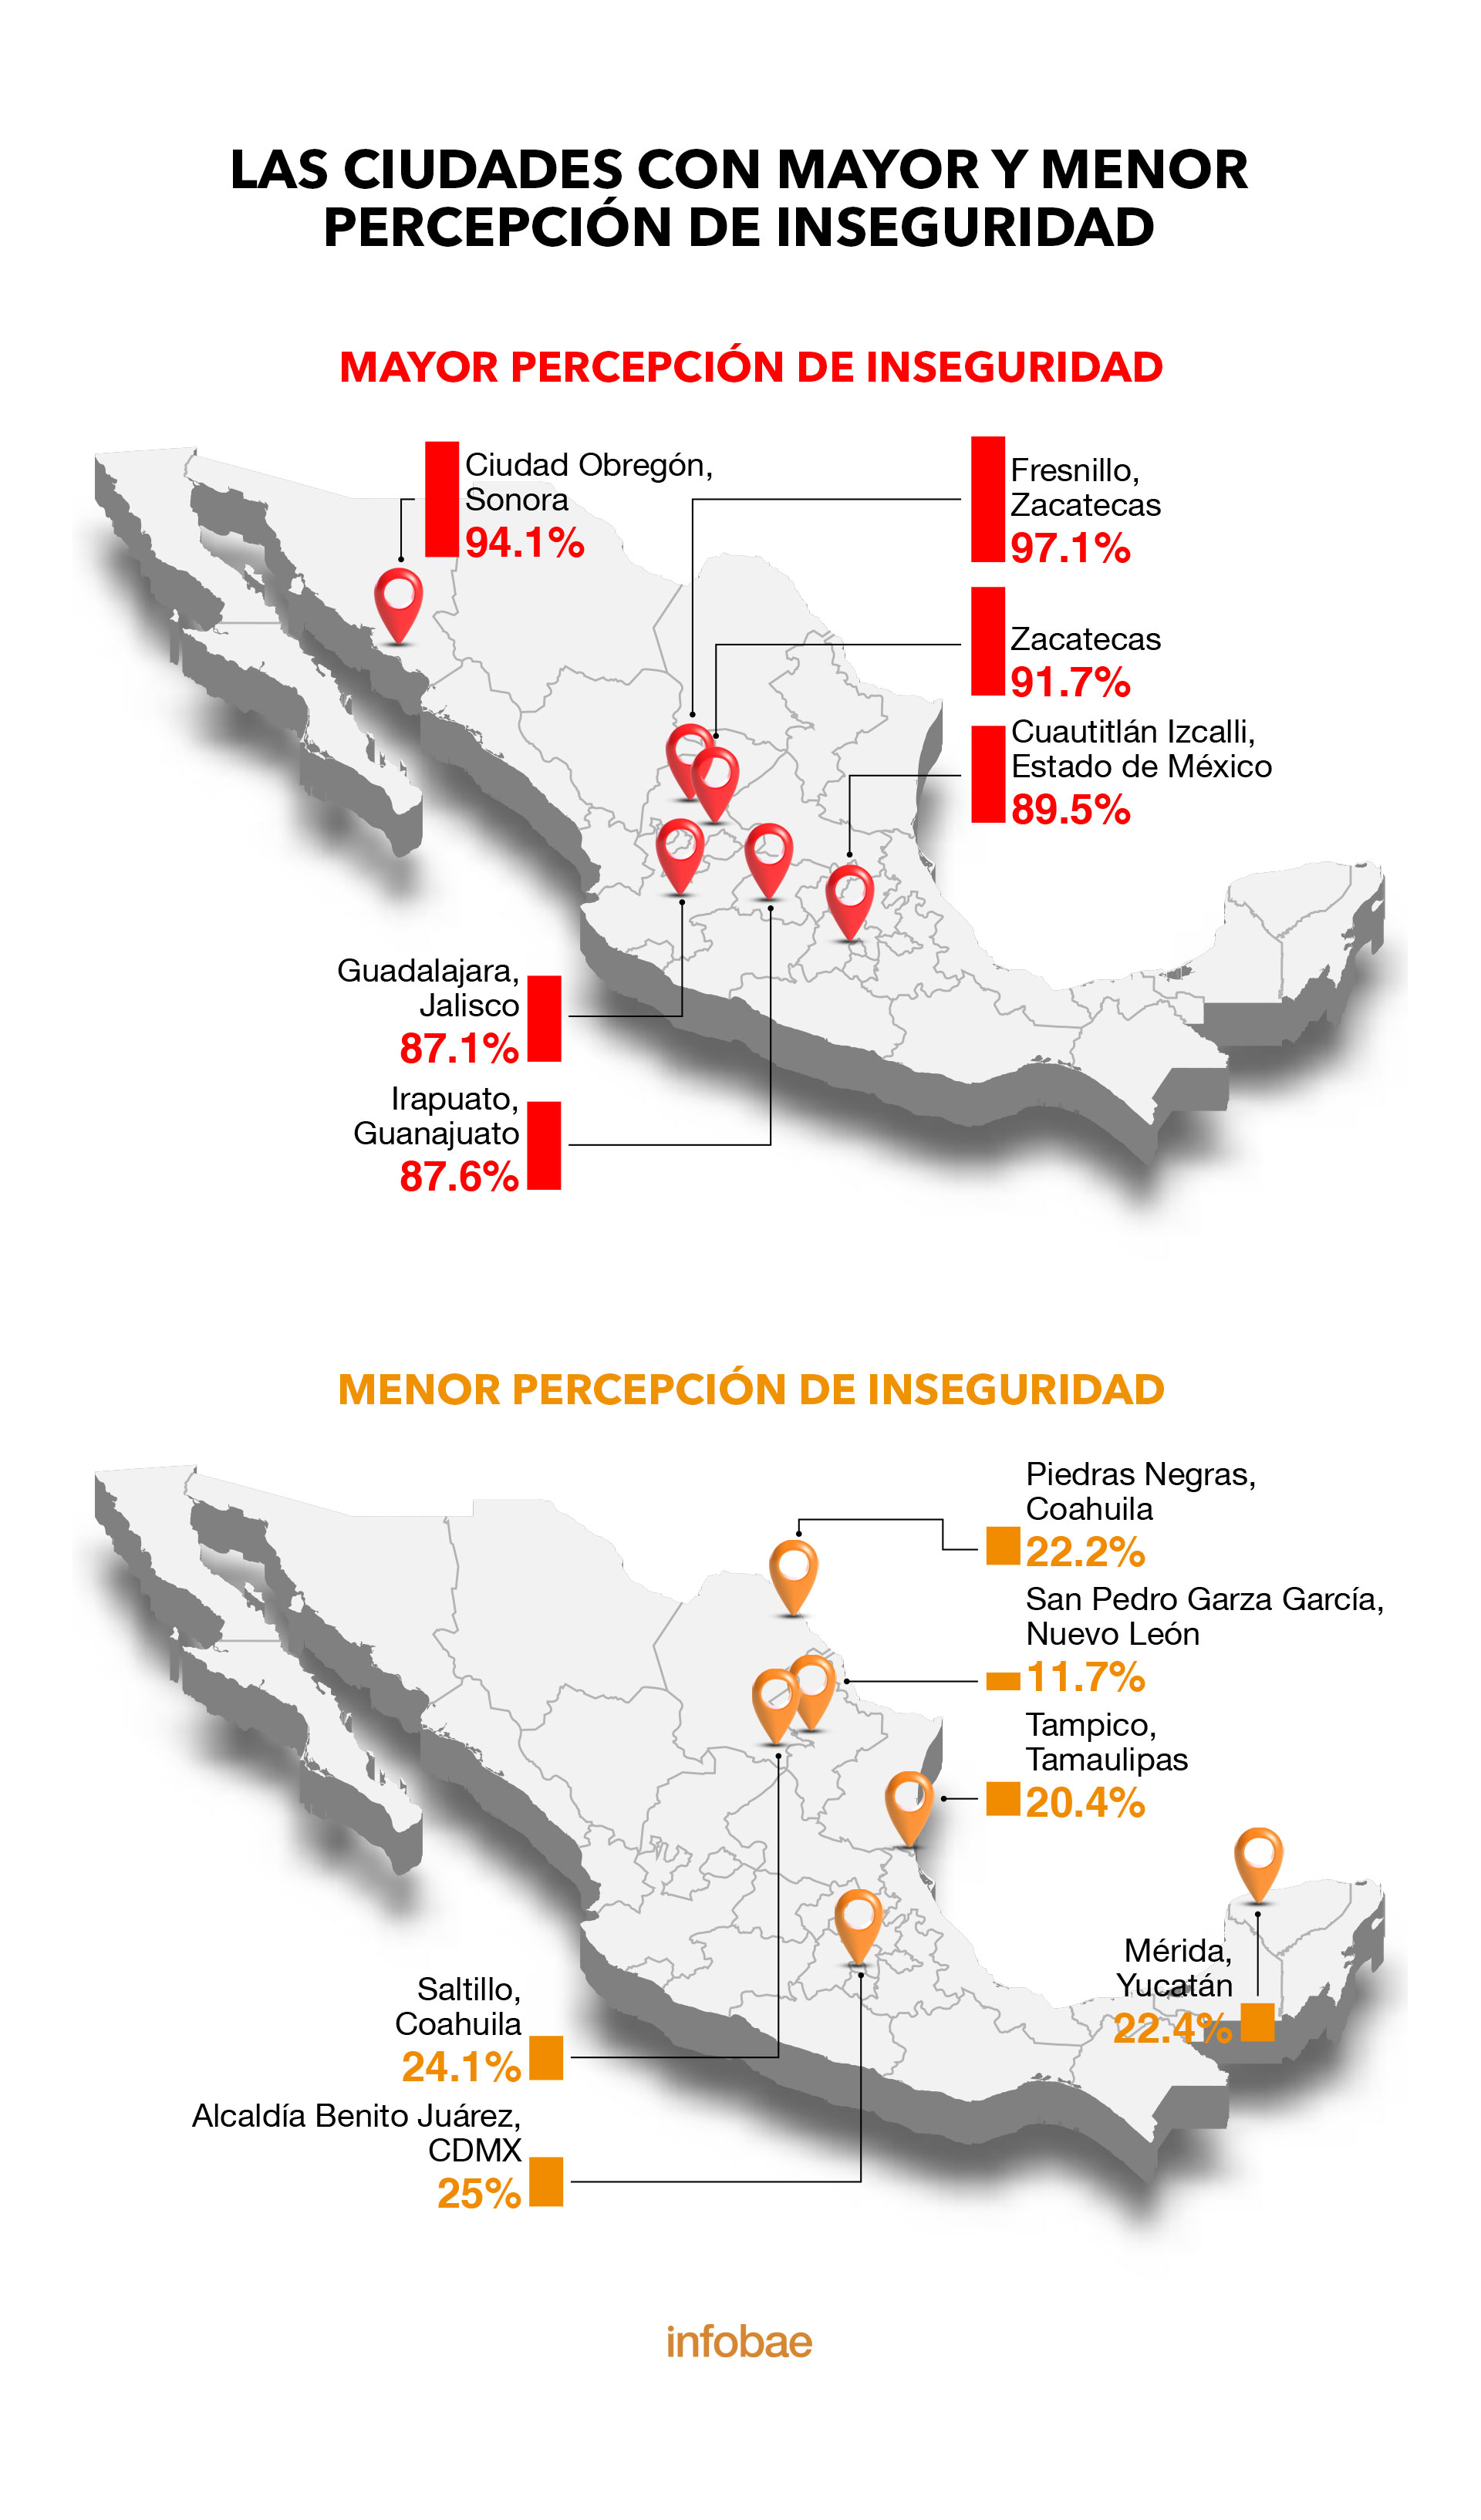 Infographic: Infobae Mexico with data from the National Urban Public Safety Survey (ENSU) prepared by Inegi